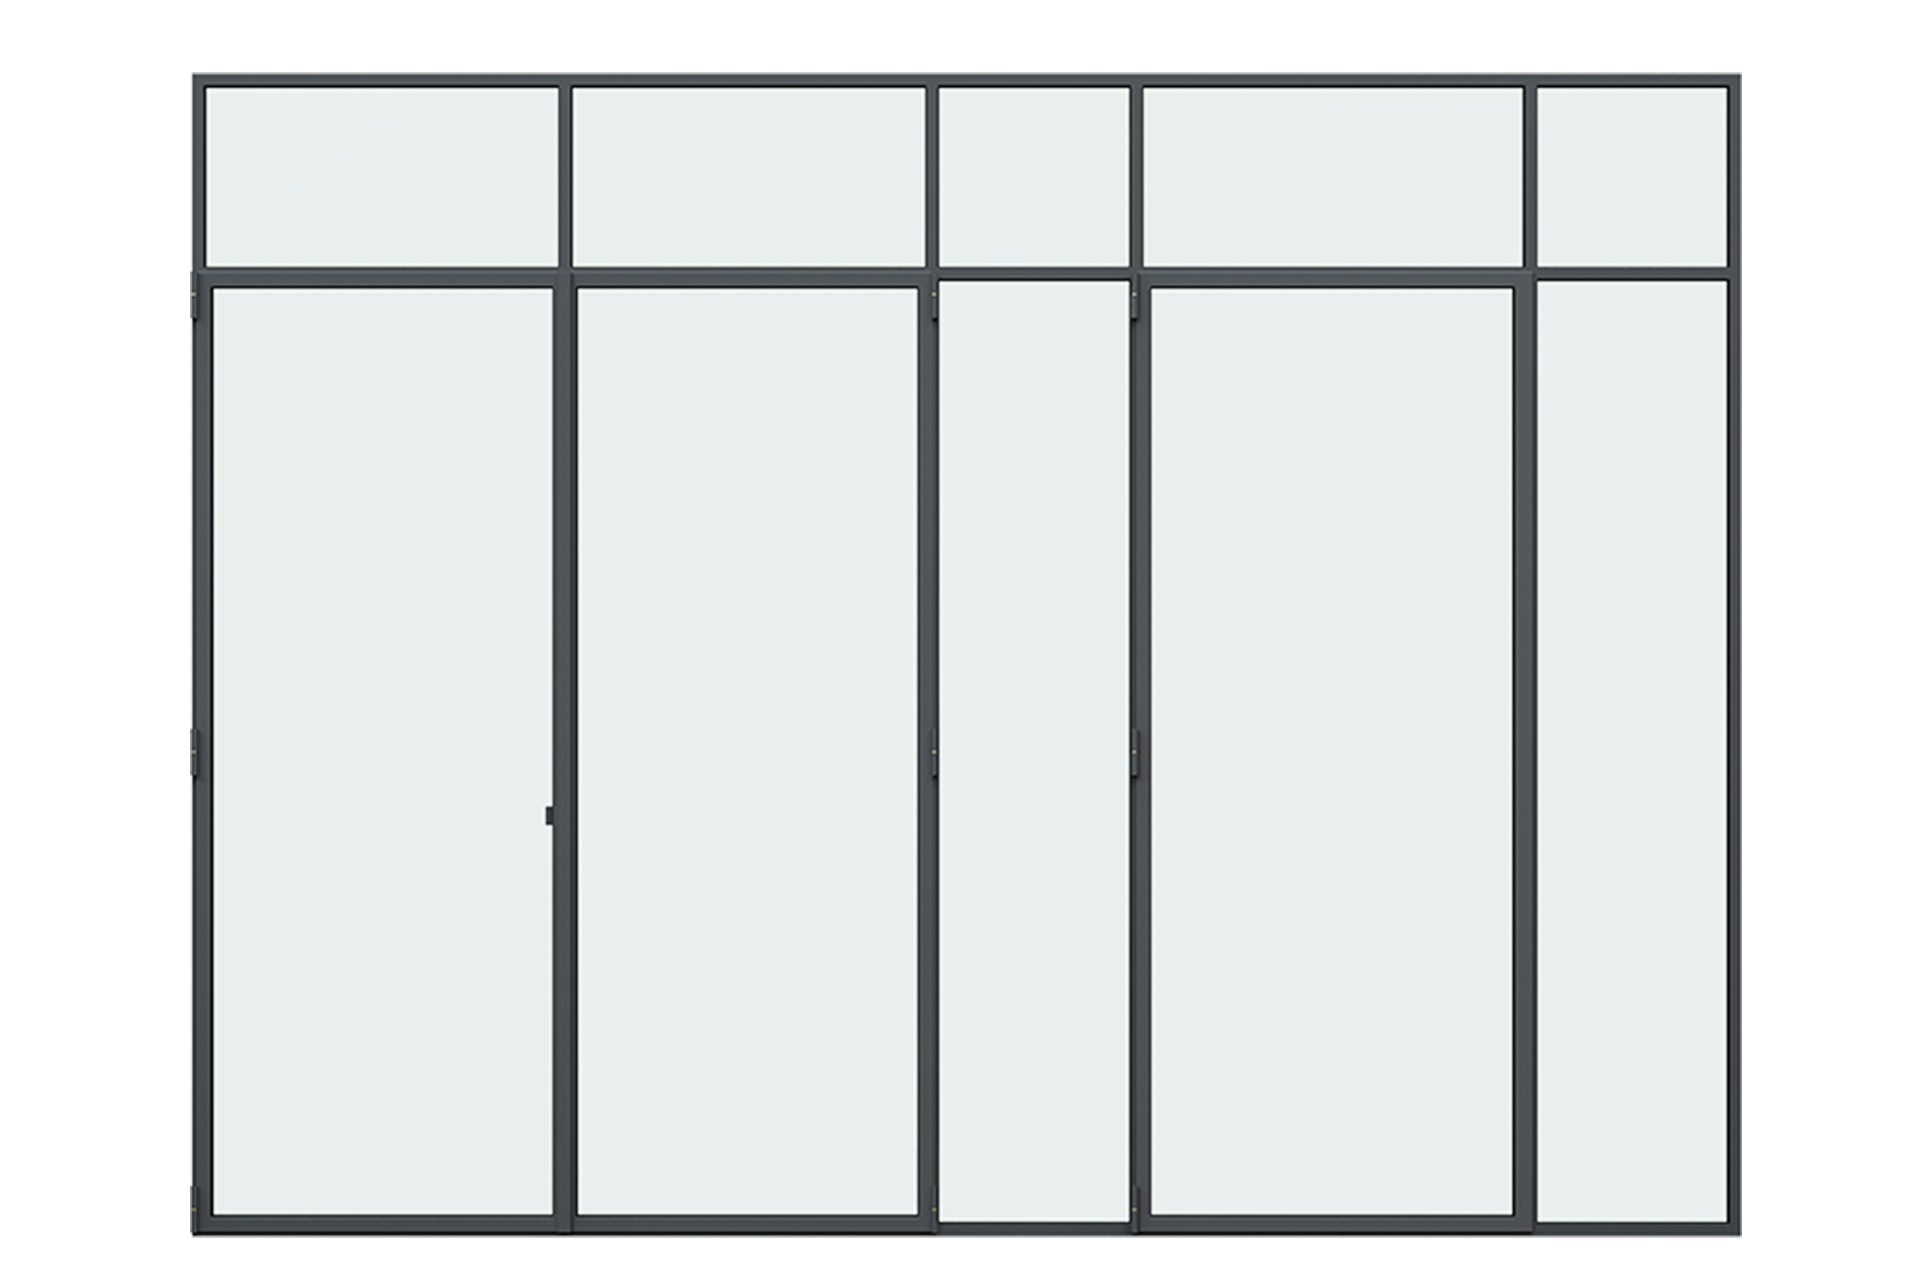 3D Render Of The French Door From A Front View